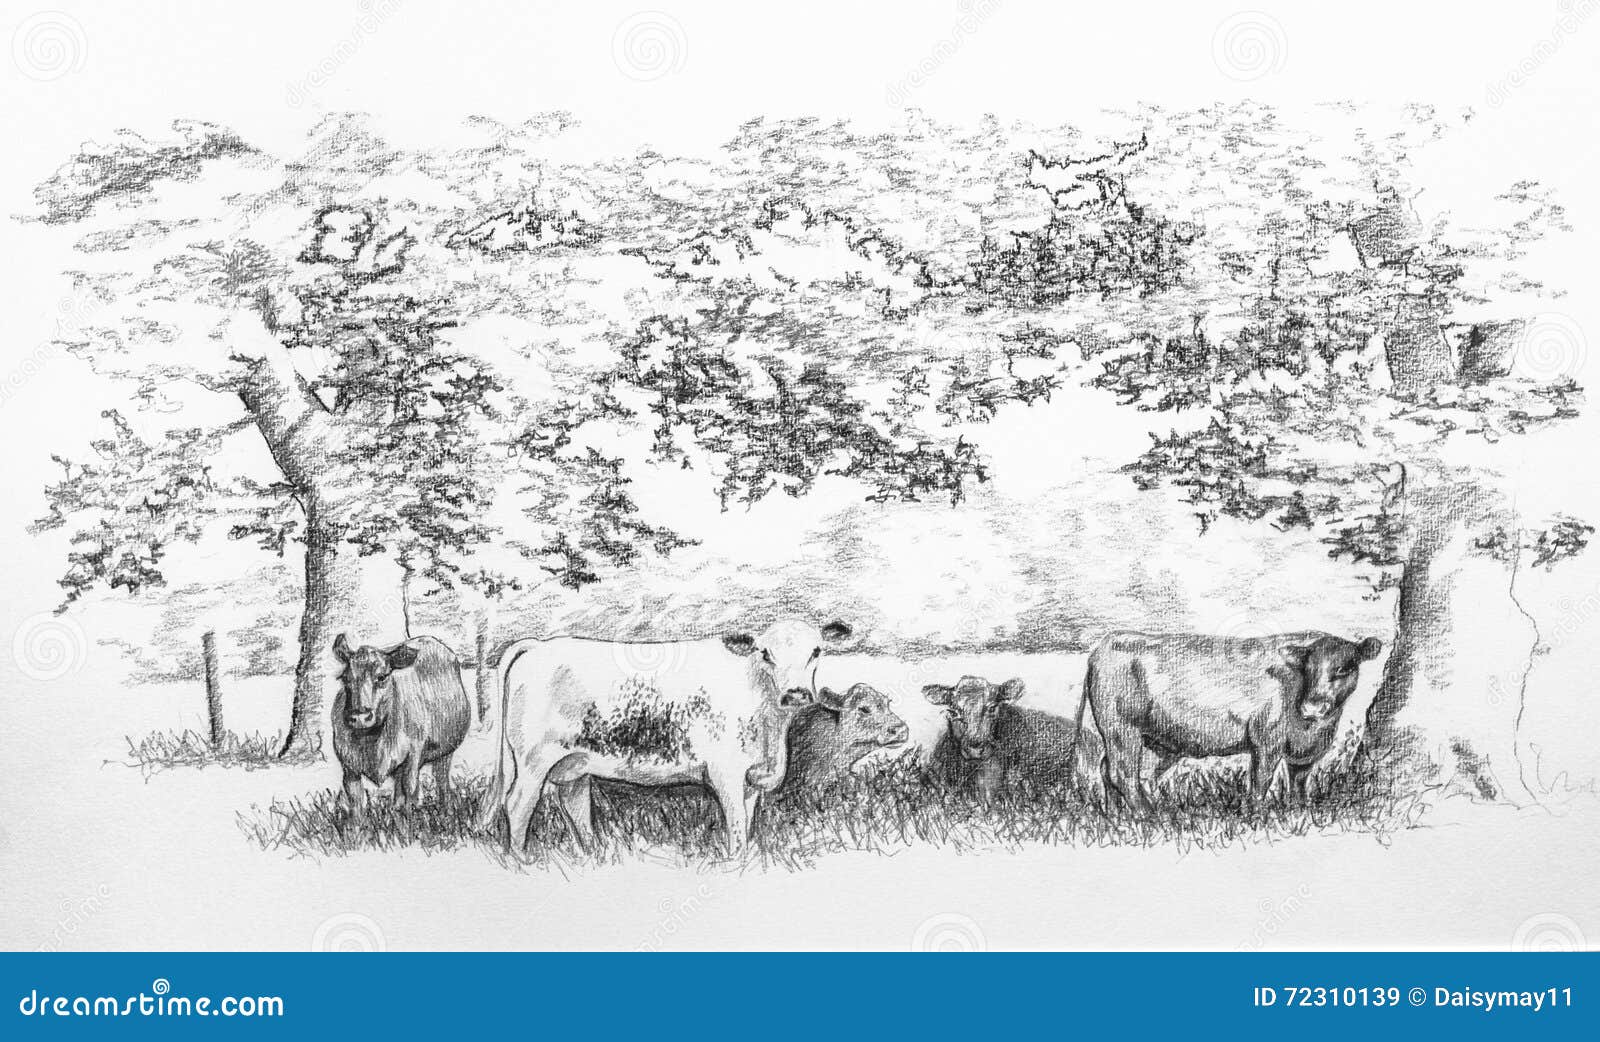 The Ultimate Collection of Nature Pencil Drawings - Over 999 Stunning  Images in Full 4K